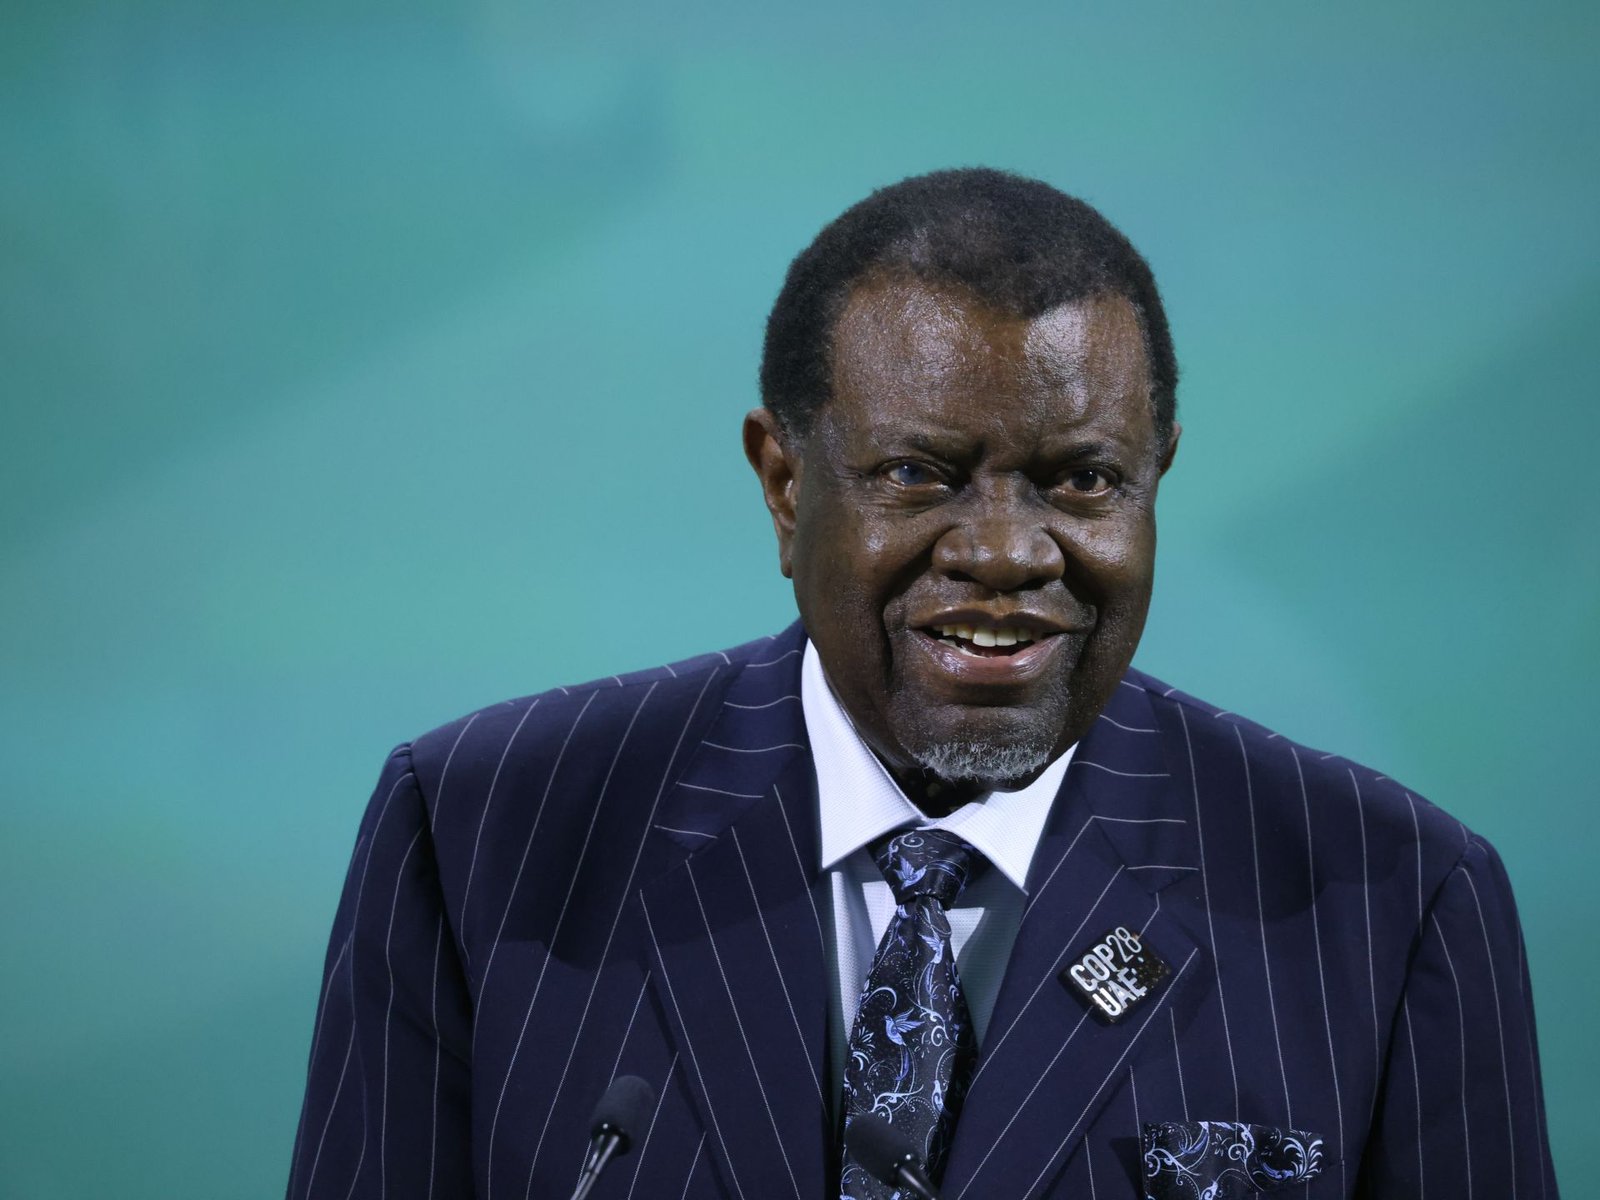 Namibia’s president to undergo treatment after ‘cancerous cells’ found | Health News